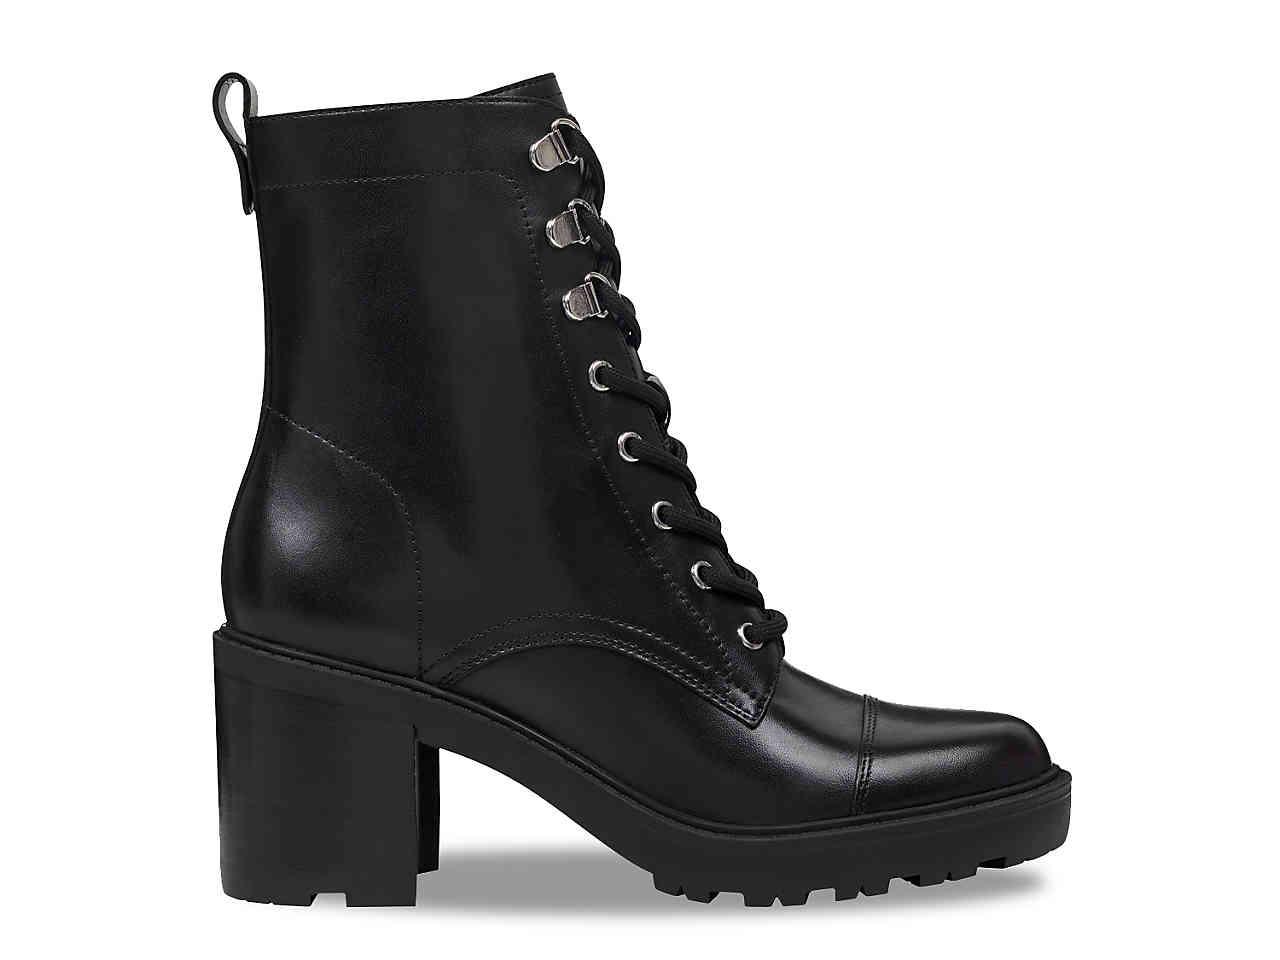 Marc Fisher Leather Lanie Combat Boot in Black Leather